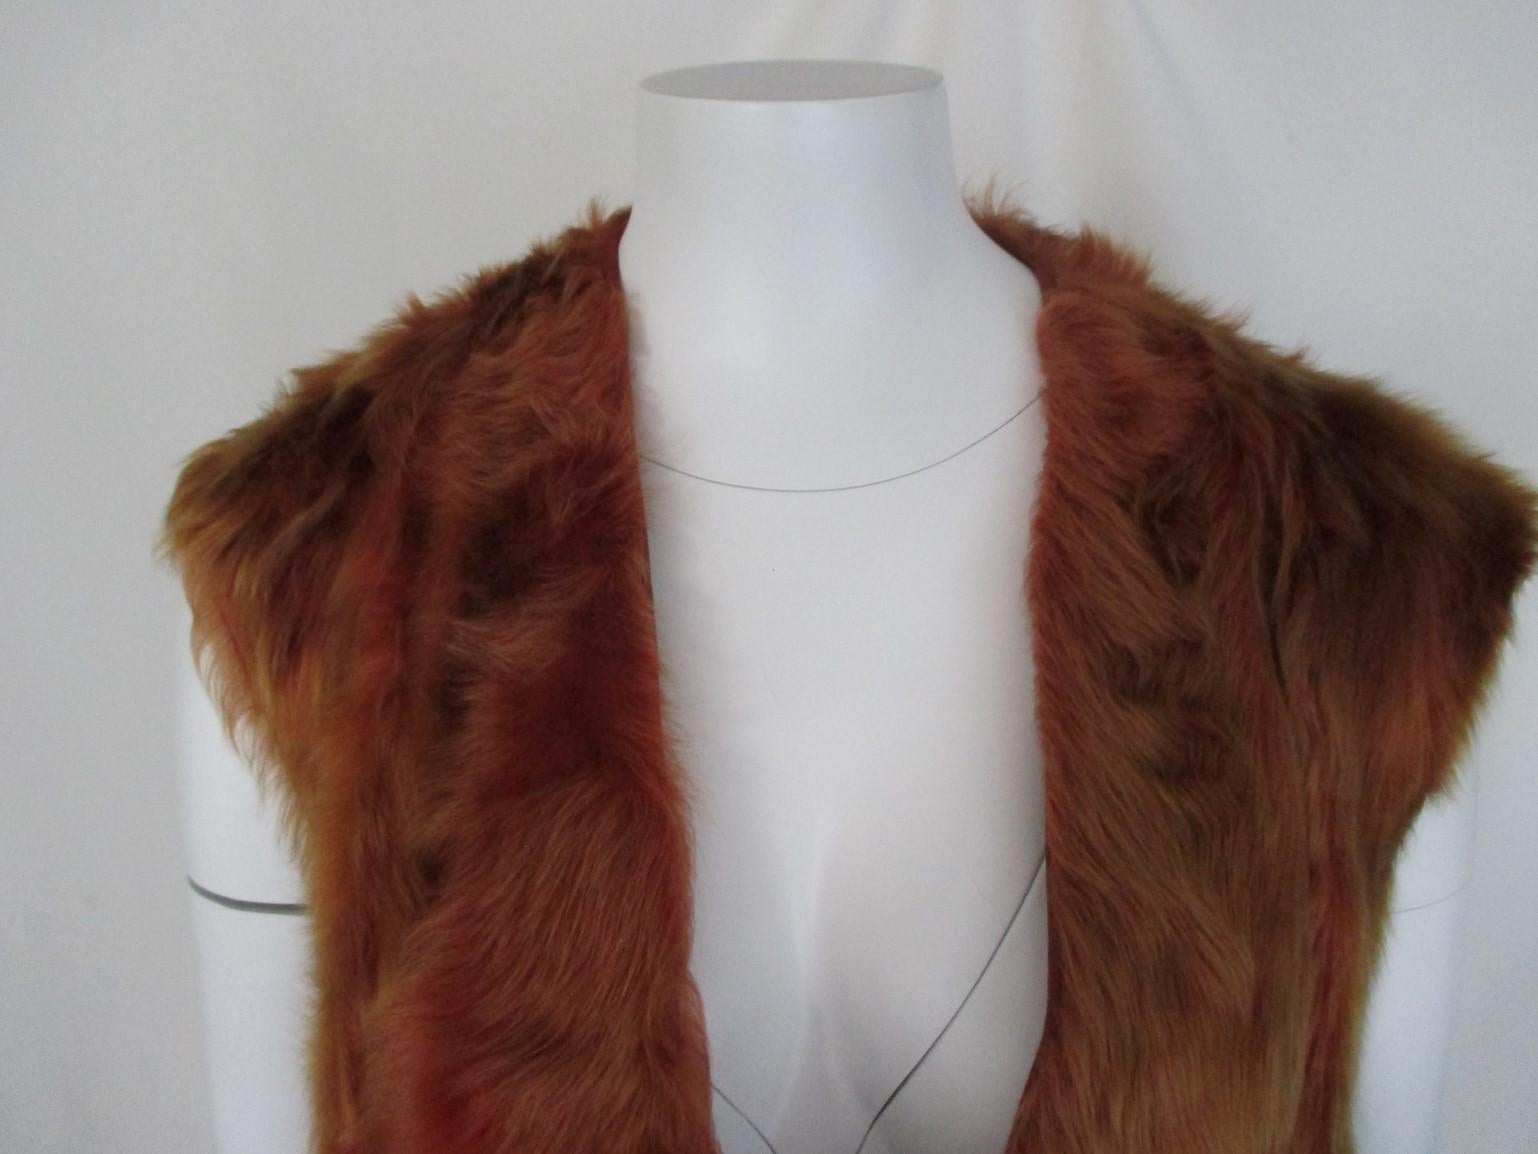 This vintage gilet is made from very soft dyed orange lamb fur.
It's reversible, to wear in a coat or without.
Light weight
It has 2 show buttons and 2 pockets.
Nice to wear over a leather jacket or sweater.
Size fits like a medium, see section